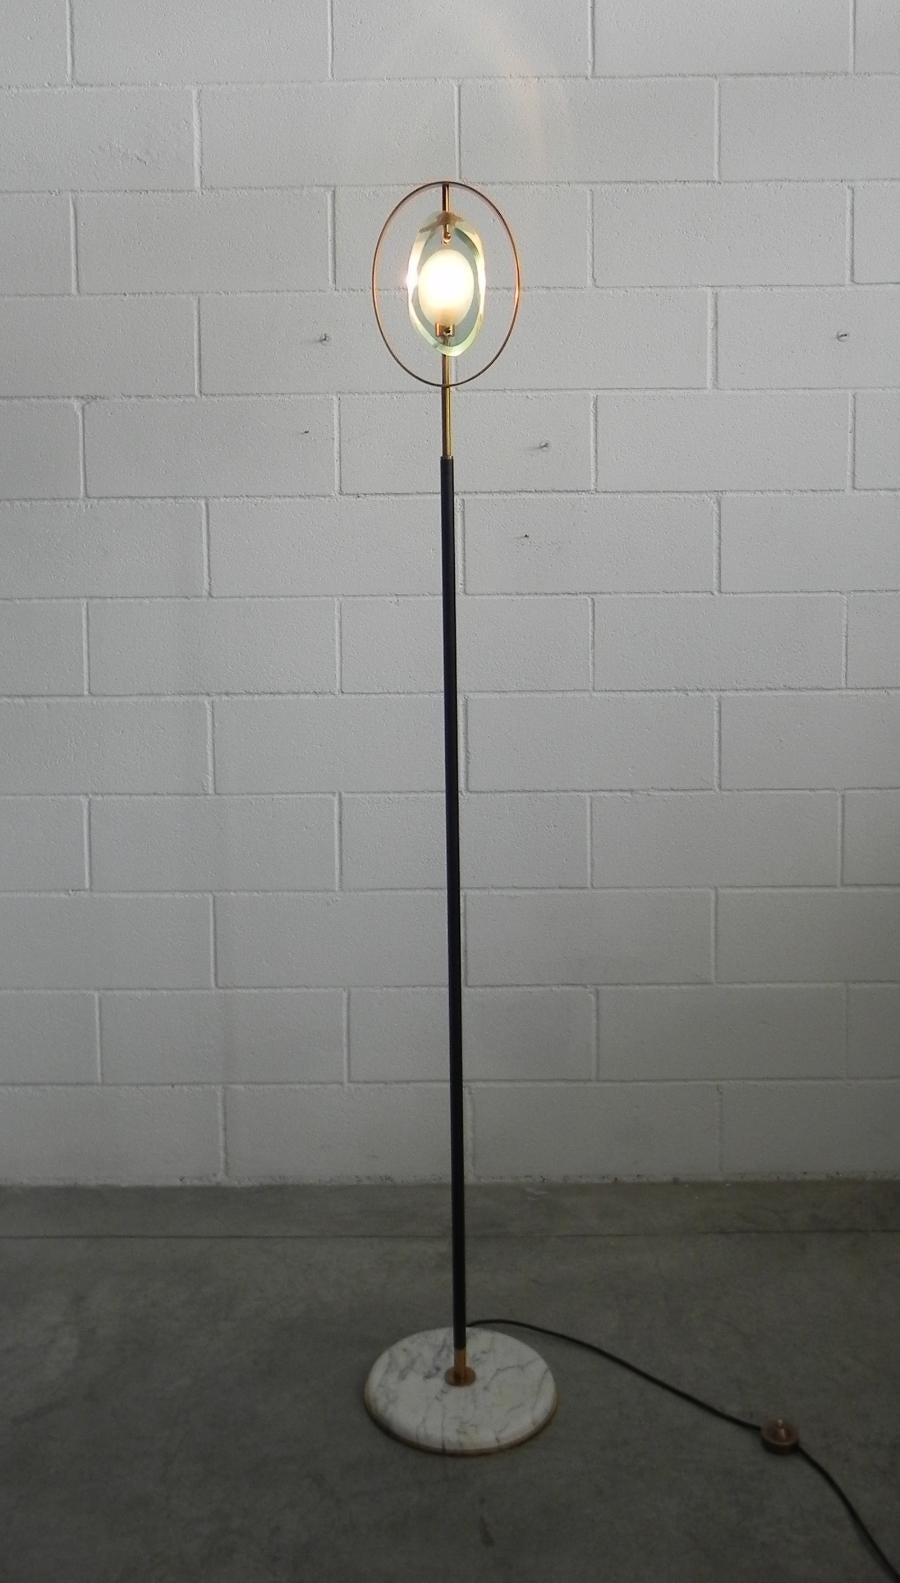 A wonderful original floor lamps designed by Max Ingrand for Fontana Arte, circa 1961. Model no 2020, from the Micro series, one of the iconic series by Max Ingrand, dated 1961.